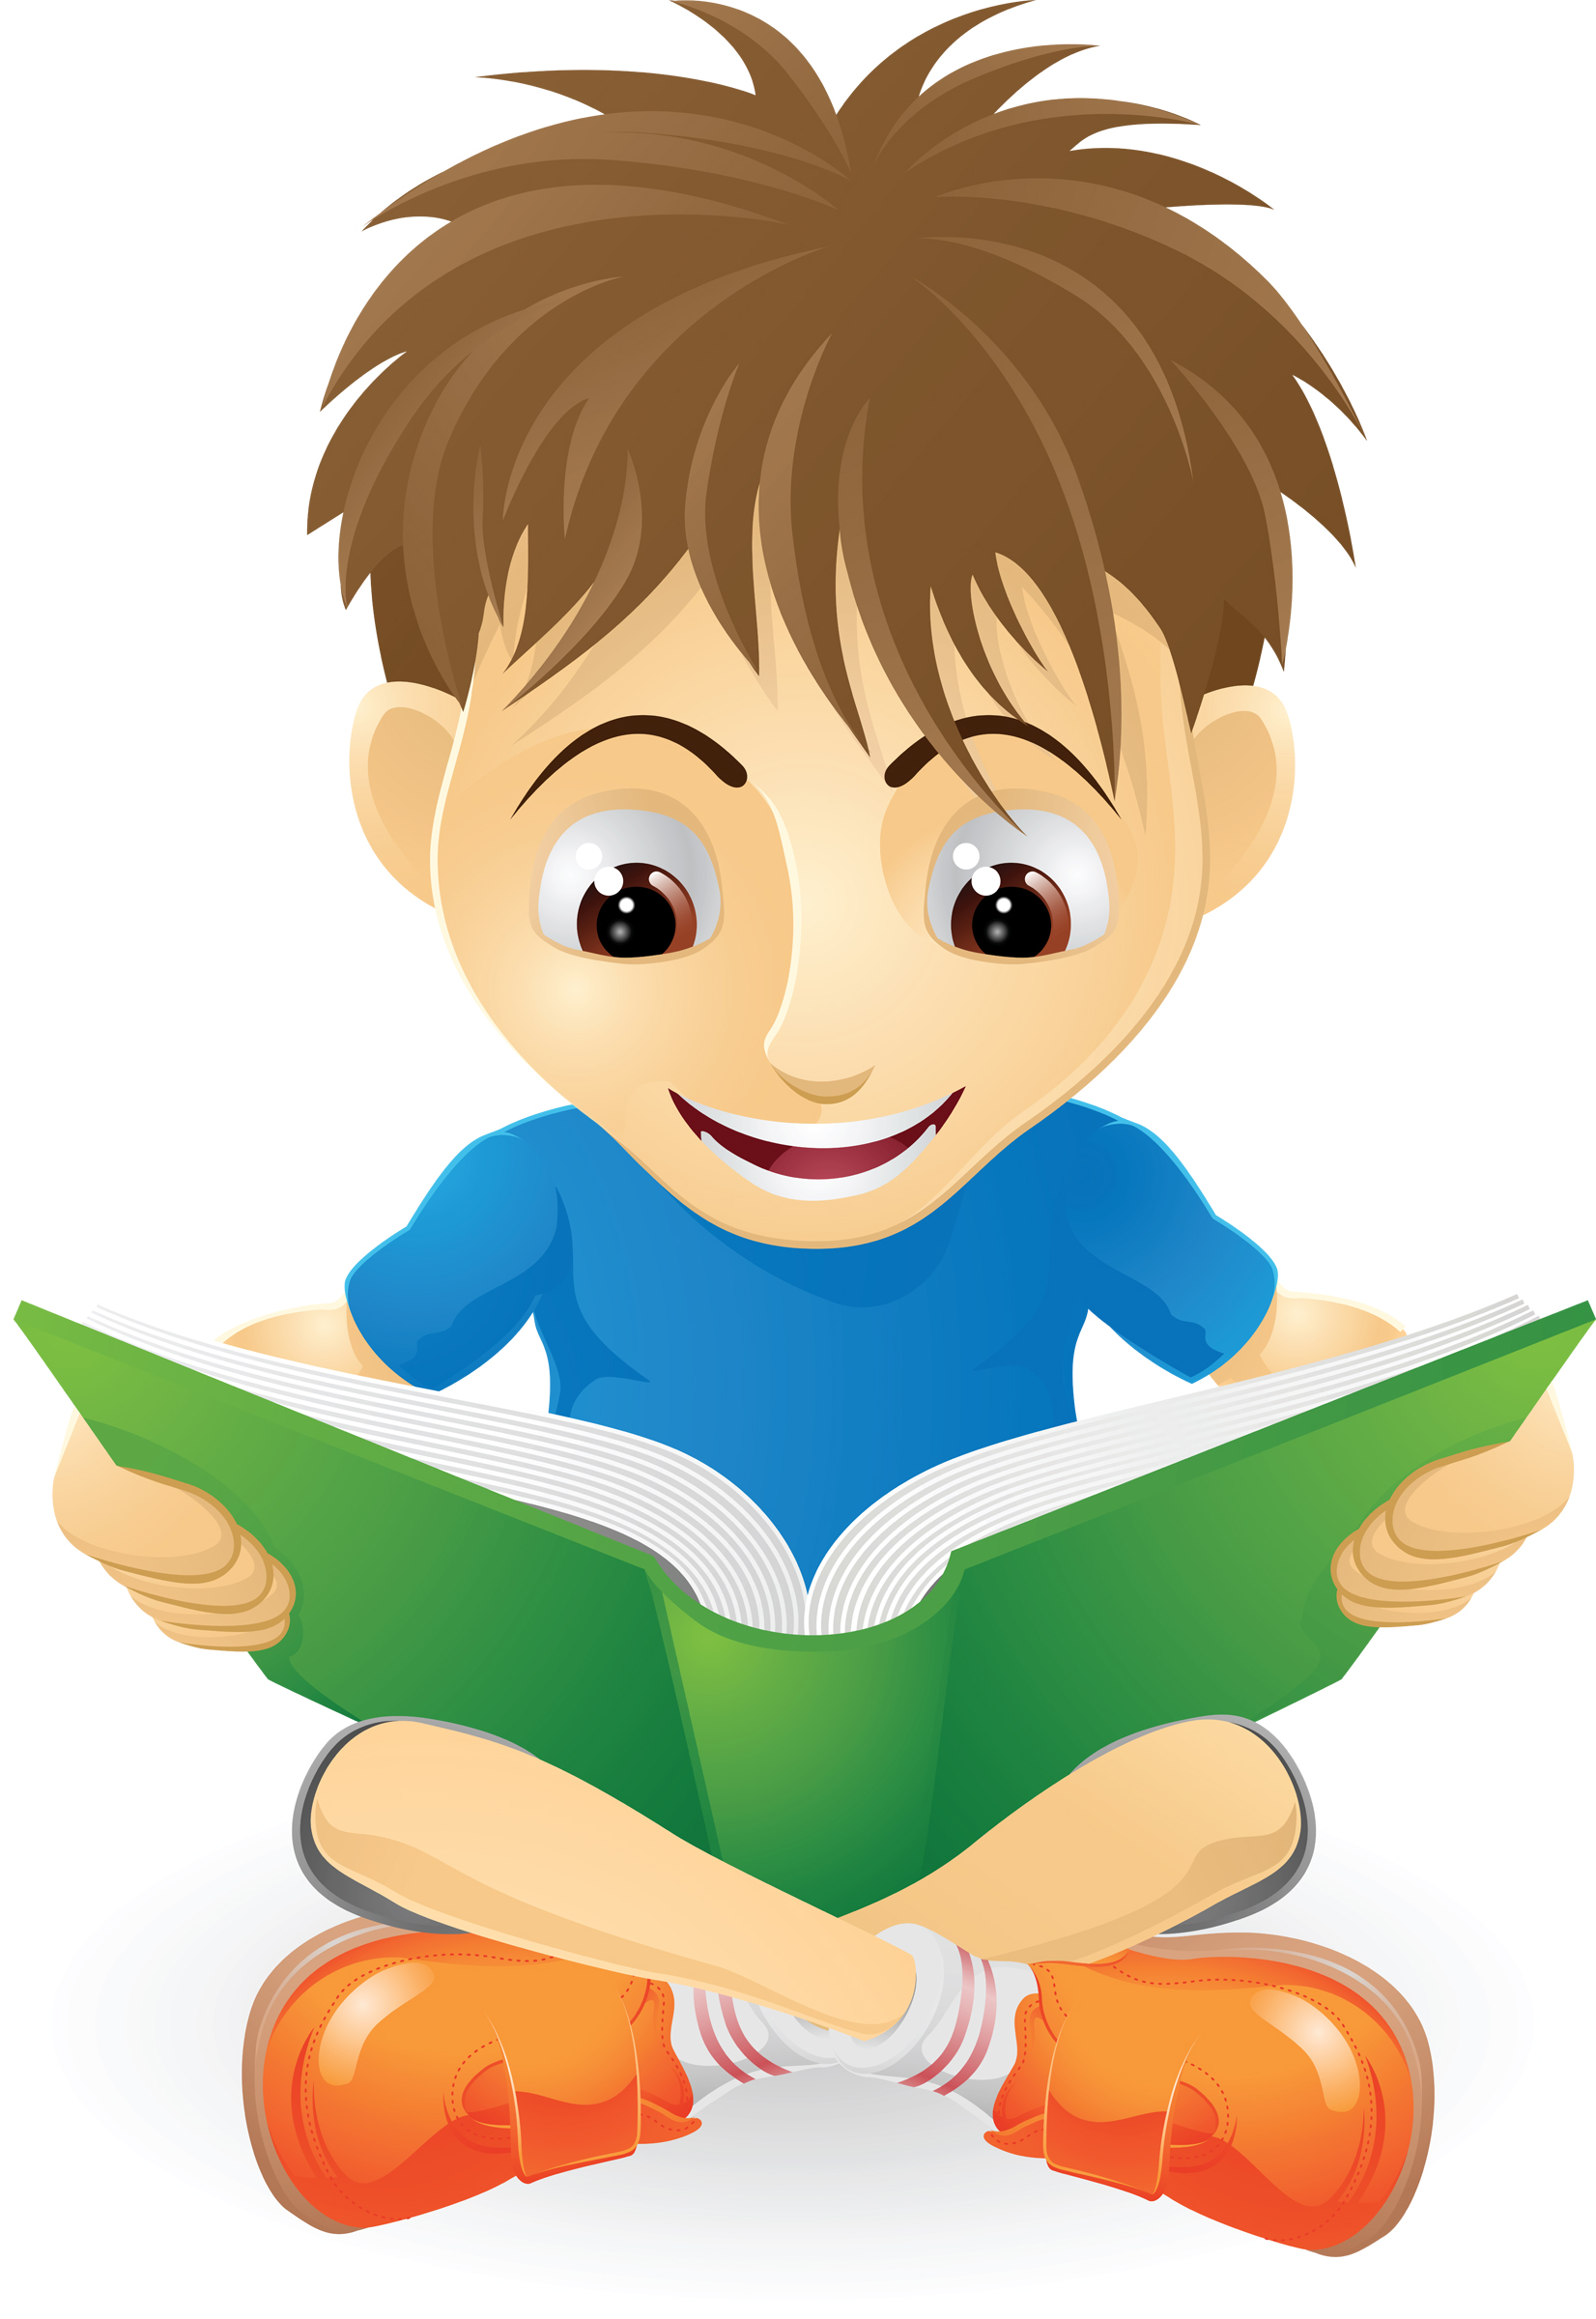 Images For > Kids Reading And Thinking Clipart